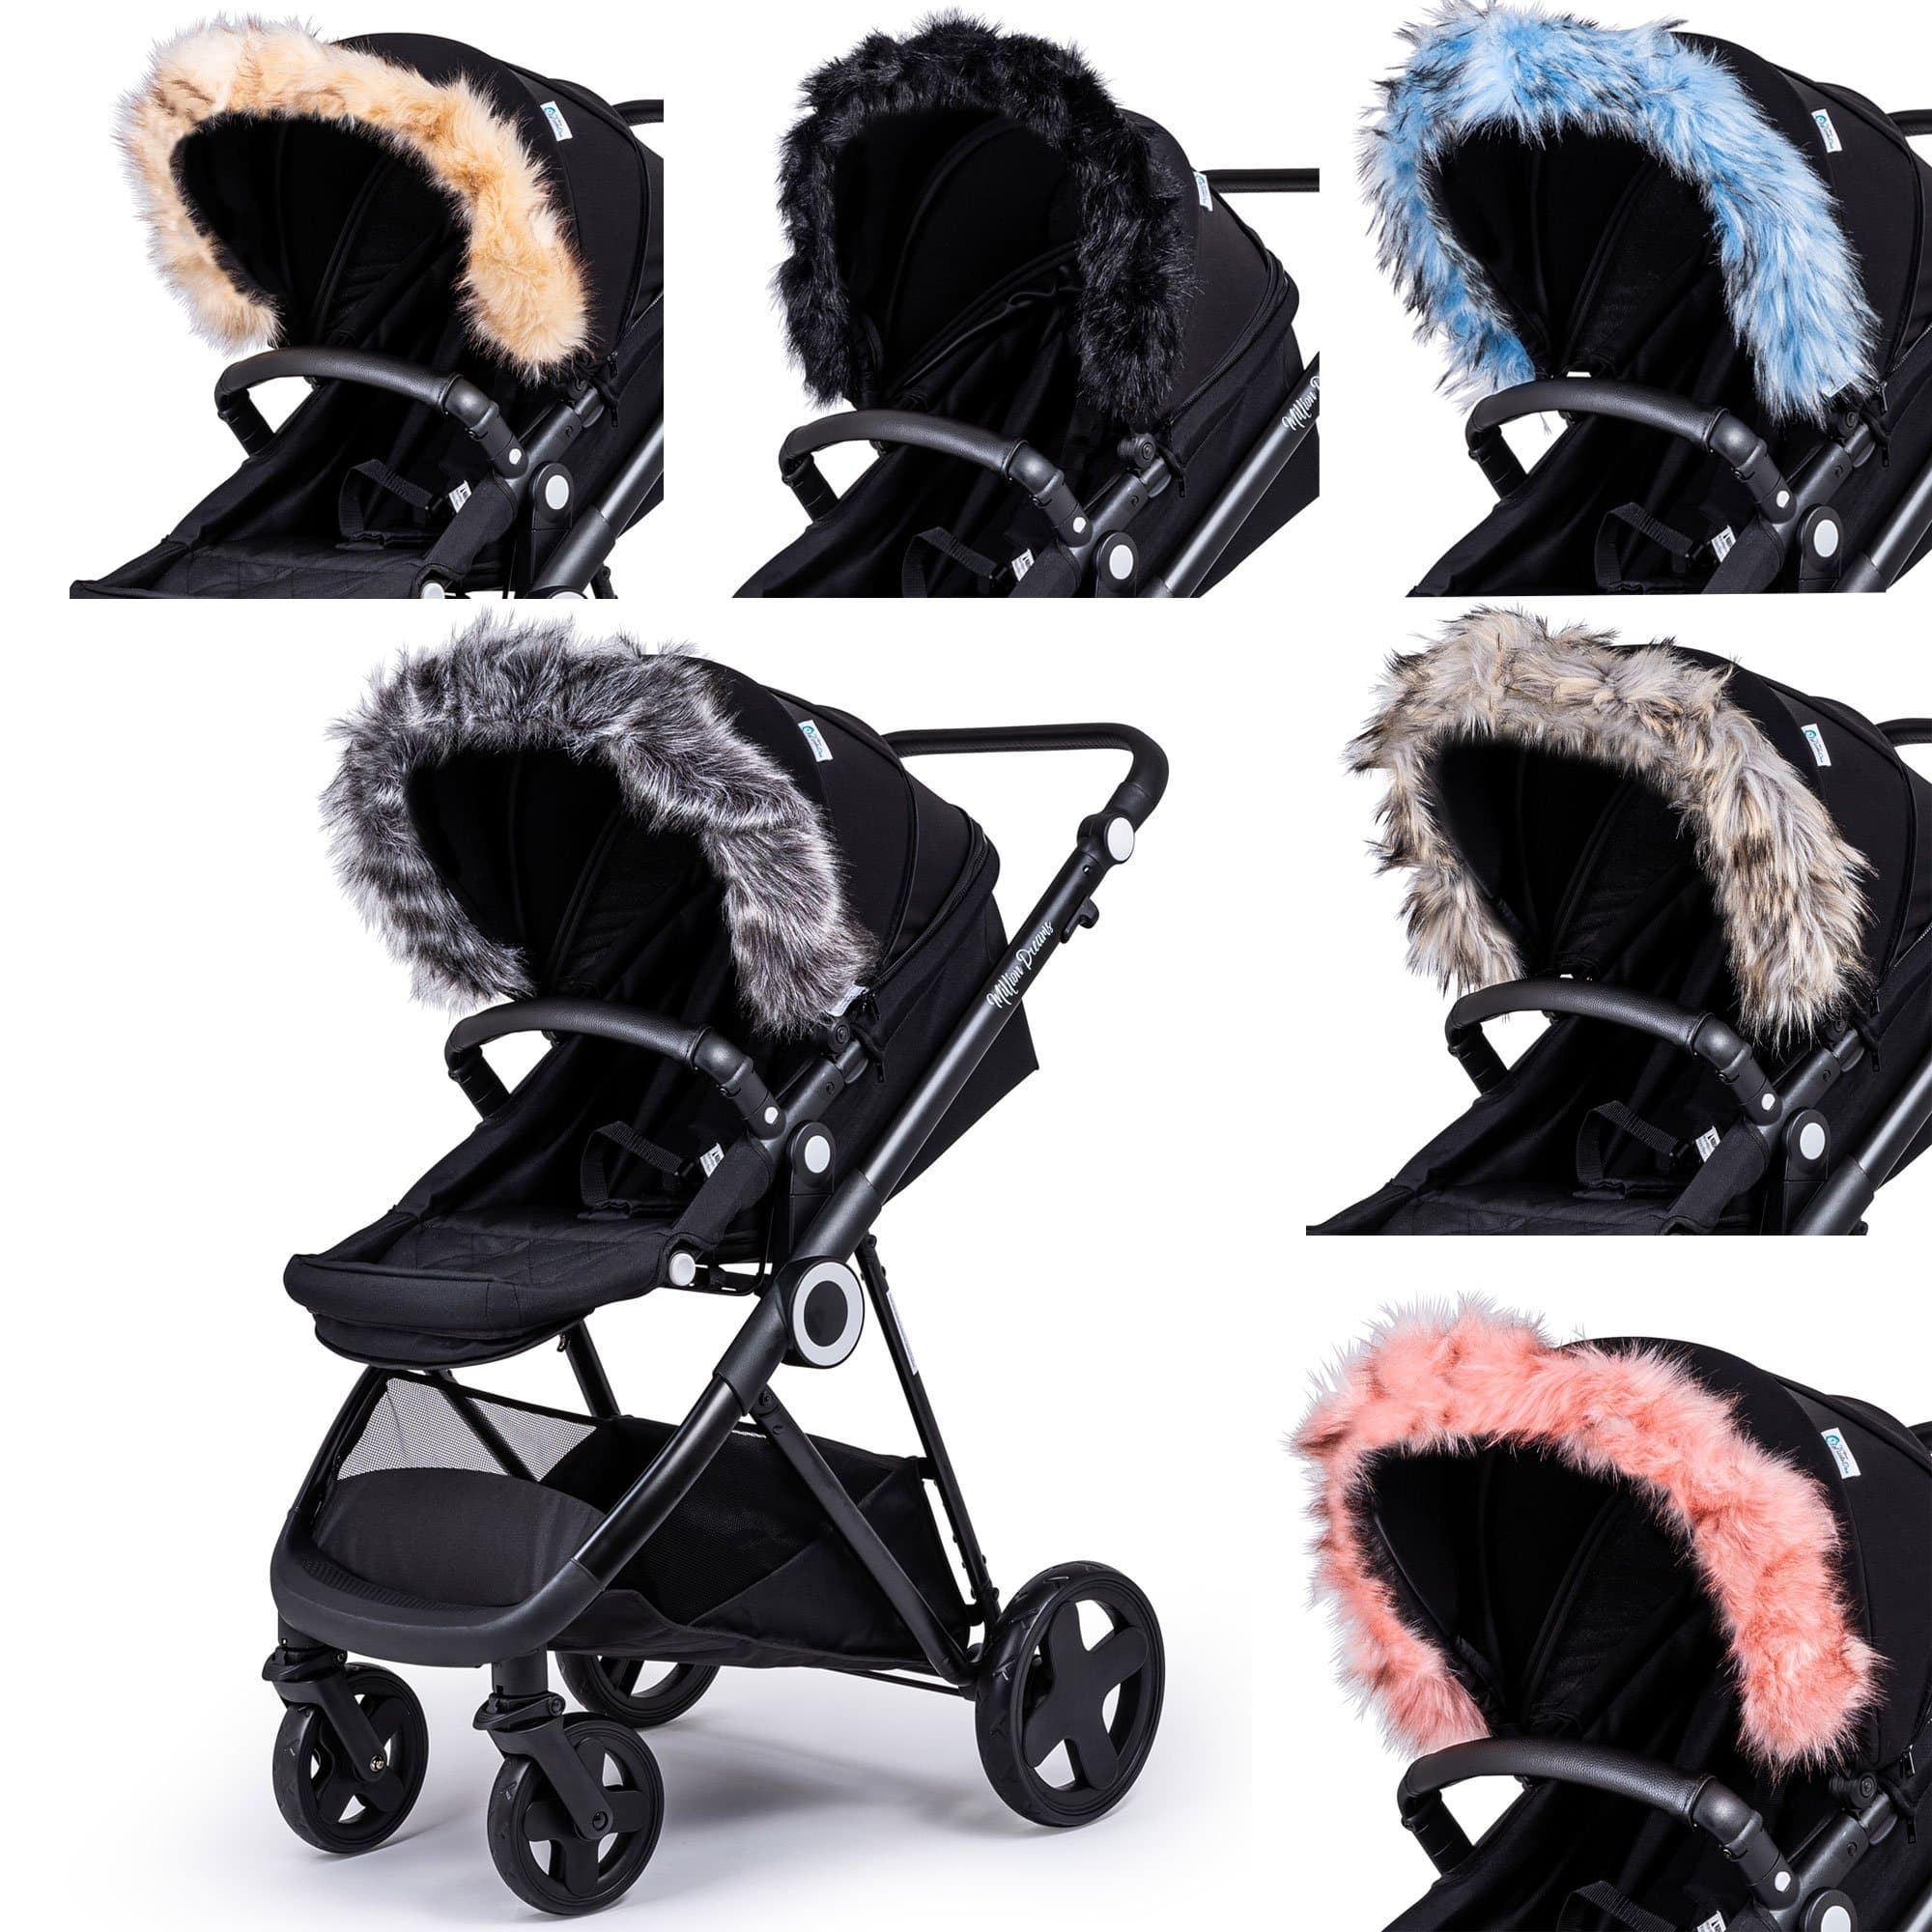 Pram Fur Hood Trim Attachment for Pushchair Compatible with Valco - For Your Little One